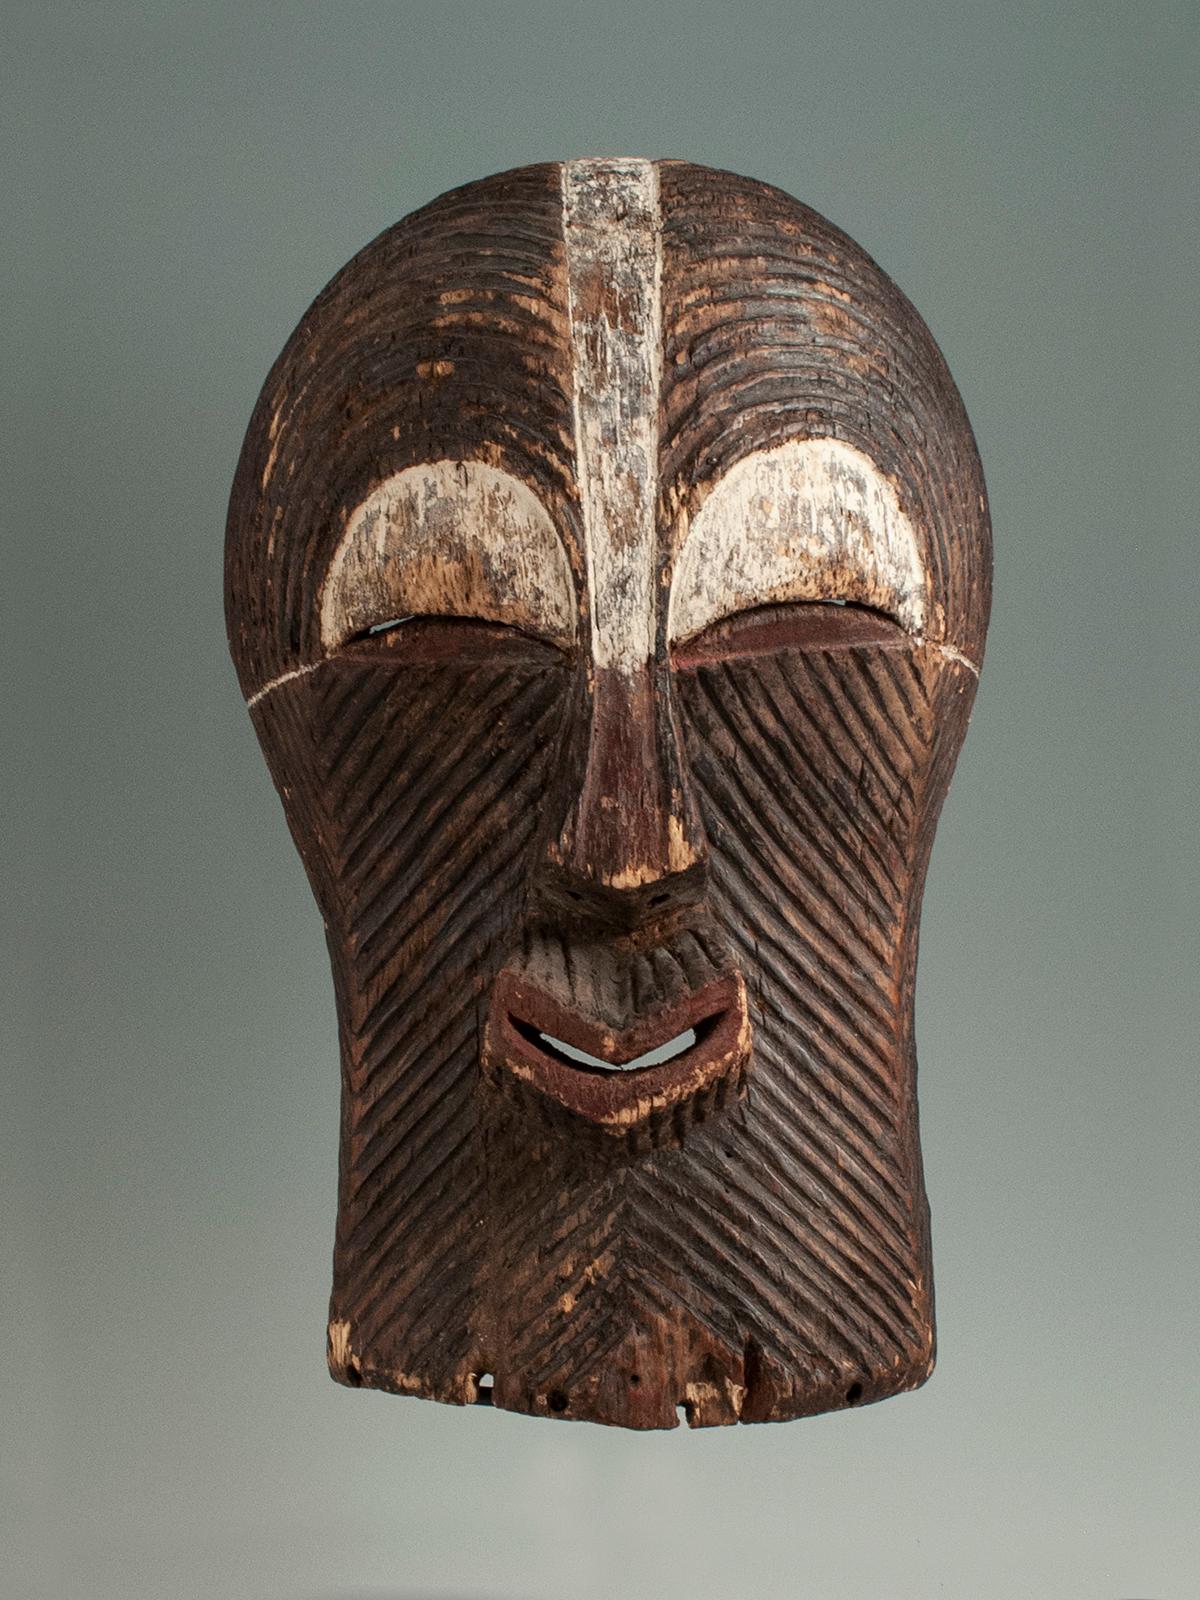 This graphic Songye Kifwebe mask has fine carved lines curved over the eyes and diagonal lines radiating from the nose and mouth in classic Kifwebe form. Mid-20th century mask from the Democratic Republic of Congo, central Africa. There are holes